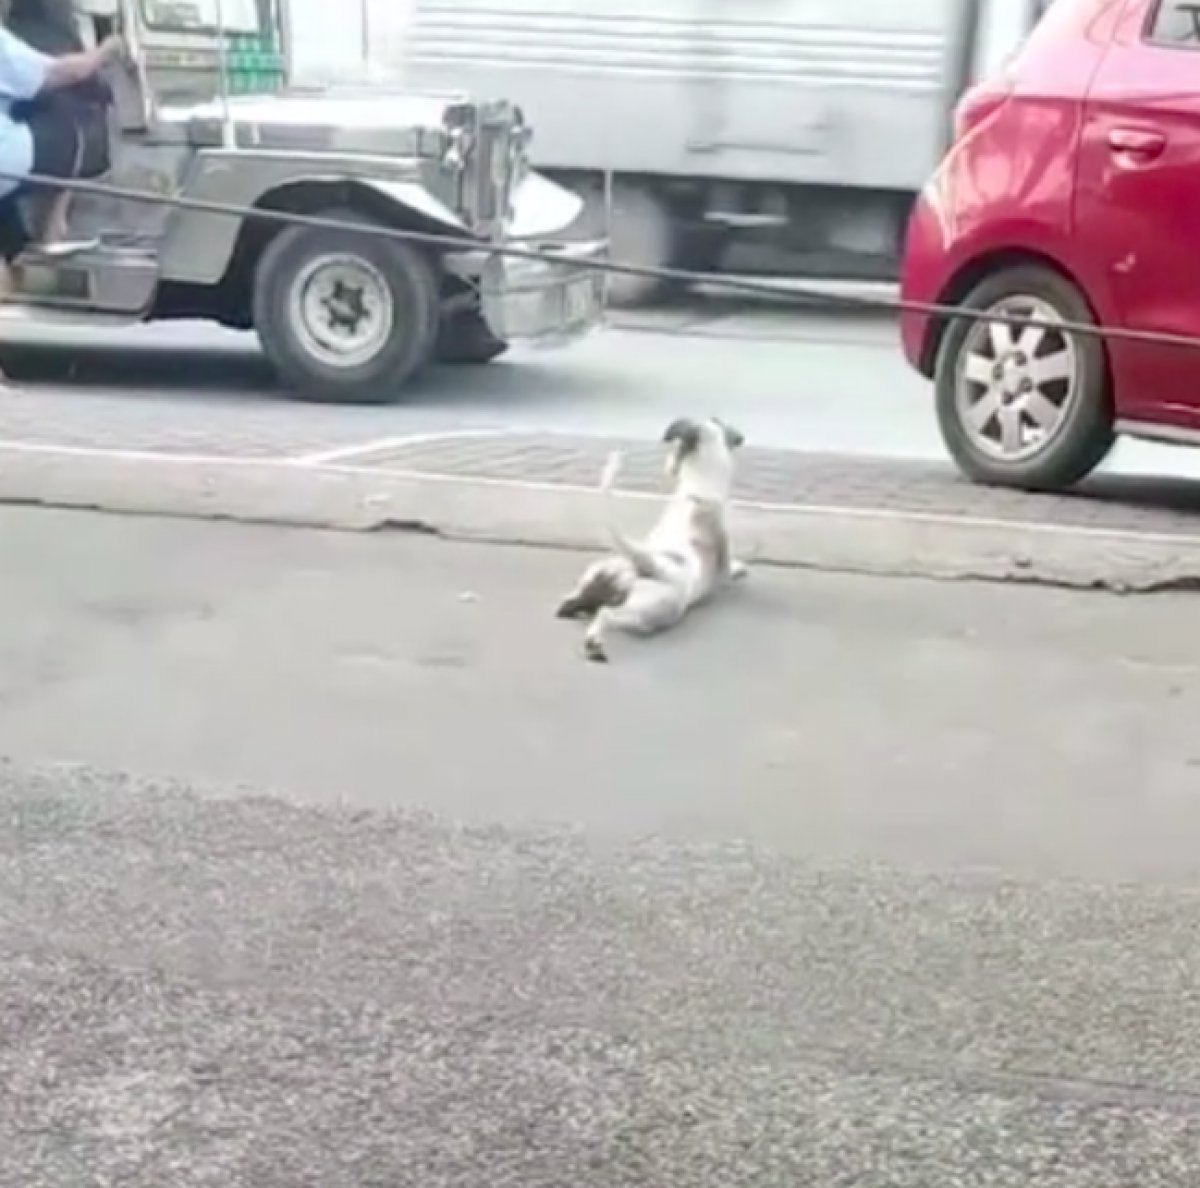 Dog pretending to be disabled #1 on camera in Philippines